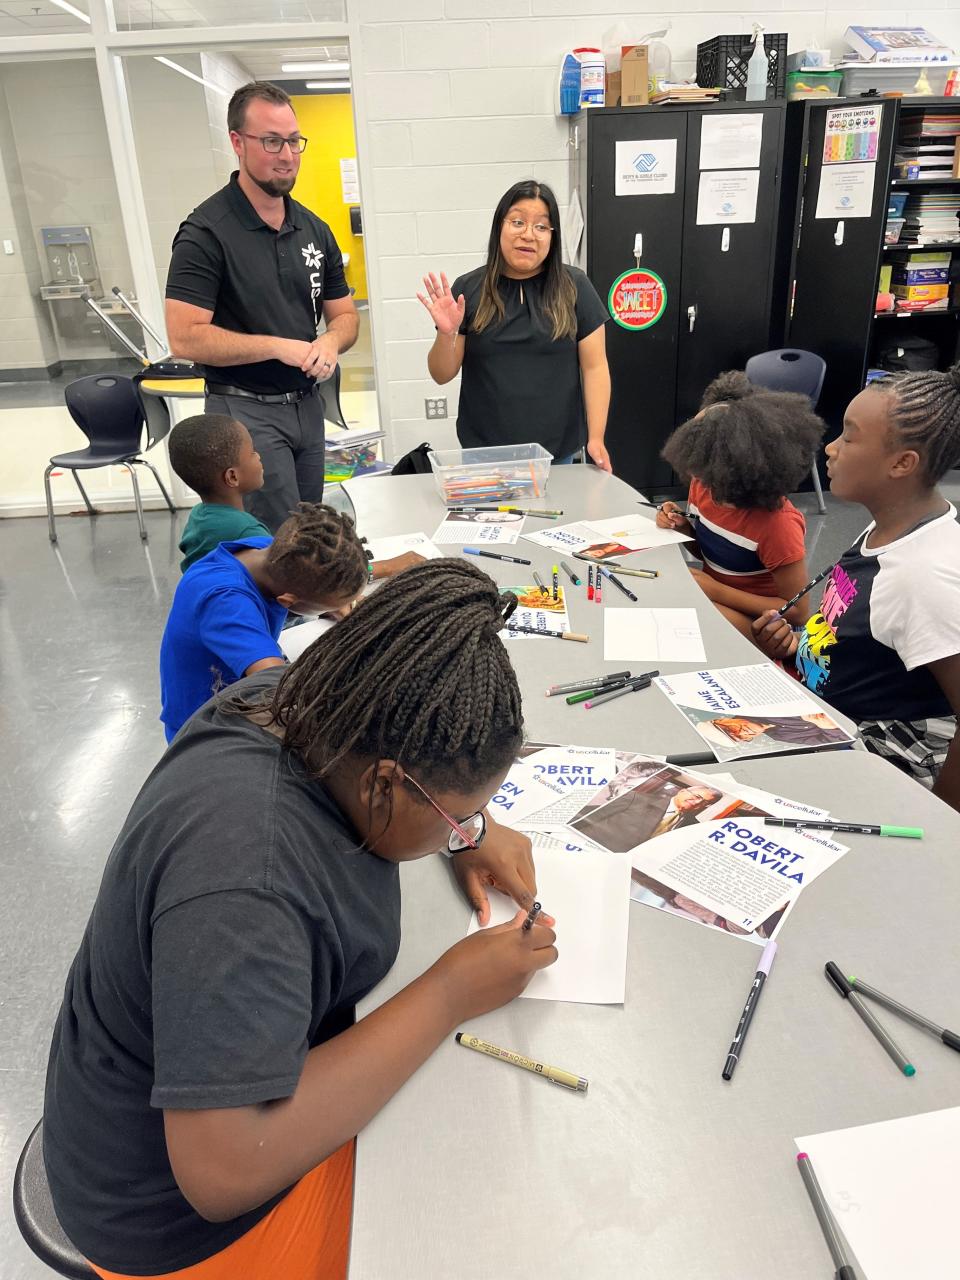 Andrew Schmenger and Angela Jimenez of UScellular oversee the activity as Giannah Williams, Gu'elz Hinez, Losine Kromah, Malejah Marsh and Iyah Groce work busily on their artwork for the first Hispanic Heritage Art Contest kickoff event at the Lonsdale location of the Boys & Girls Club of the Tennessee Valley. Aug. 31, 2023